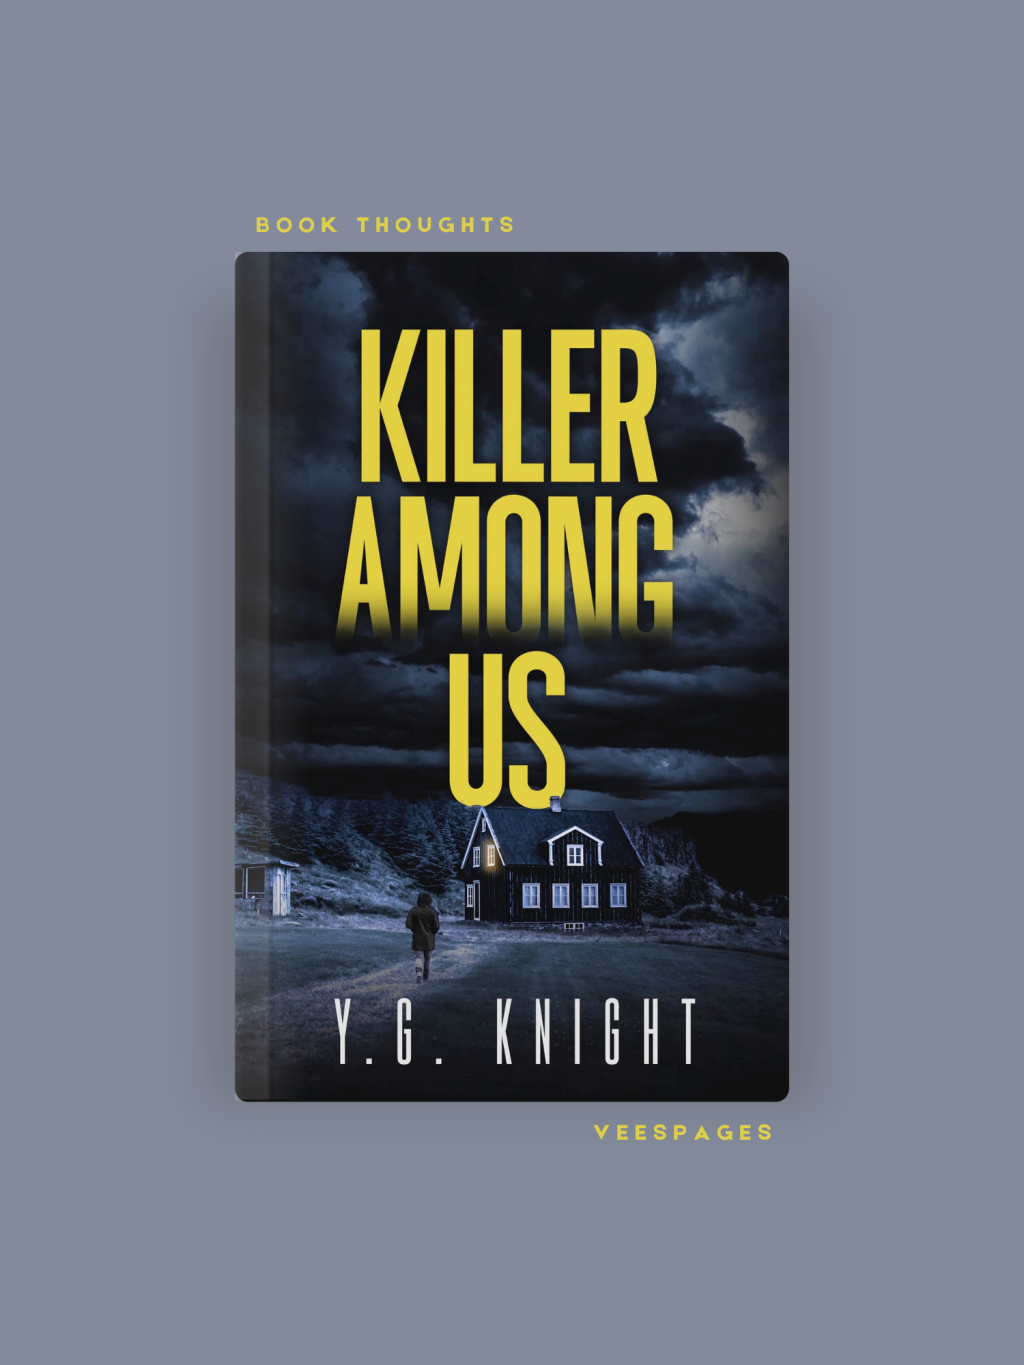 Killer Among Us by Y.G. Knight ⏤ Murder Mystery Party Takes A Turn for the Worst